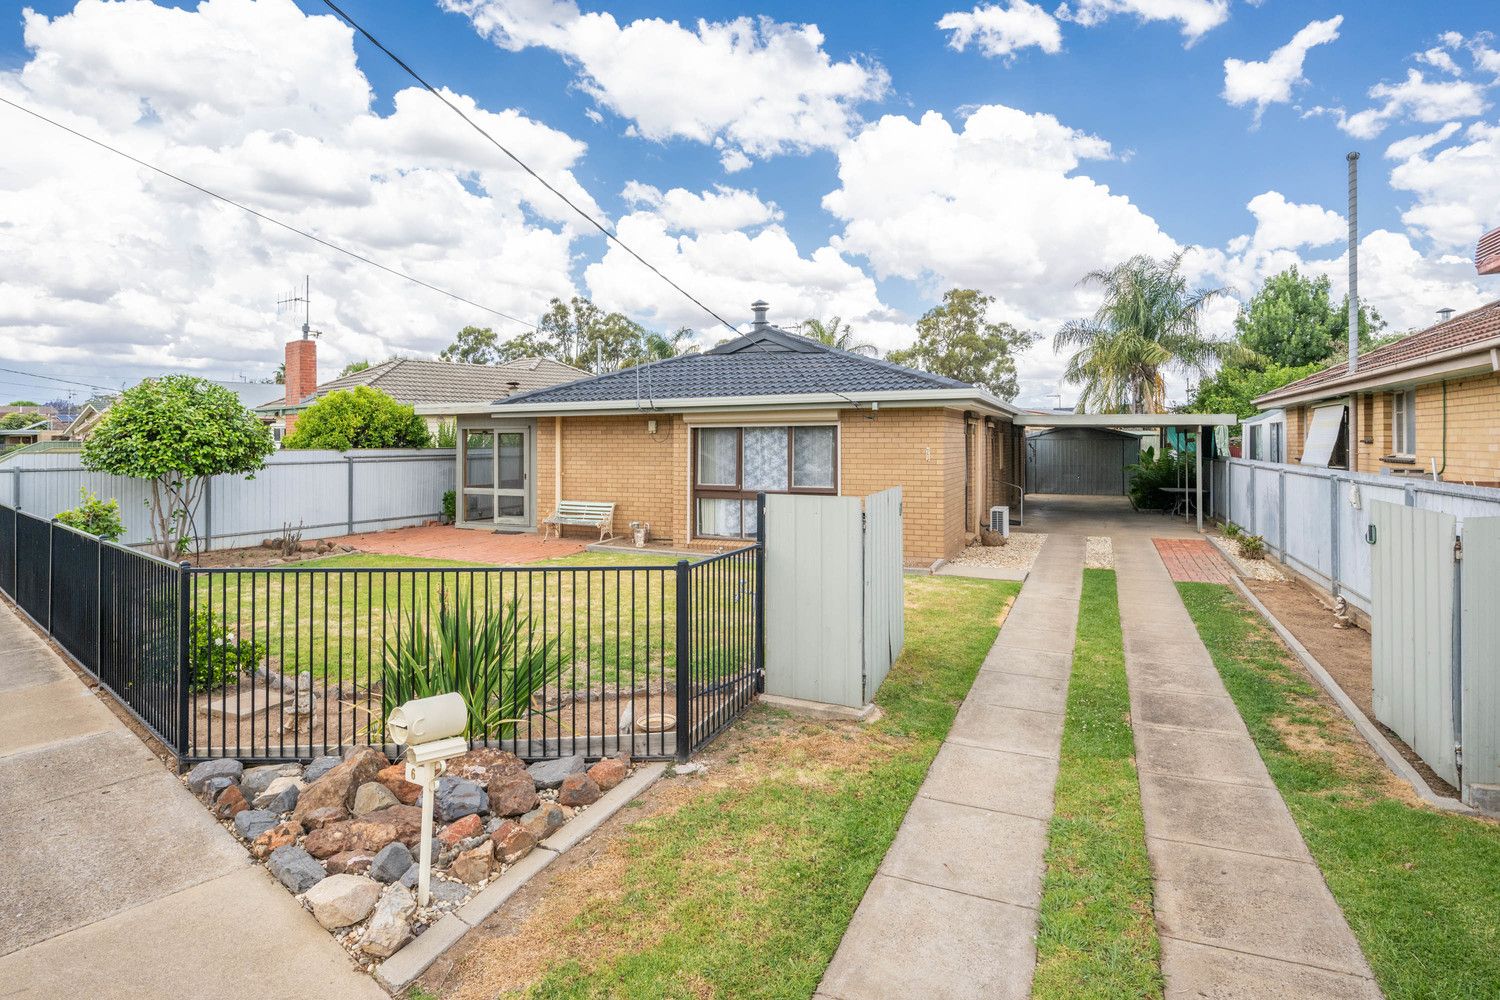 3 bedrooms House in 6 Cornish Street SHEPPARTON VIC, 3630